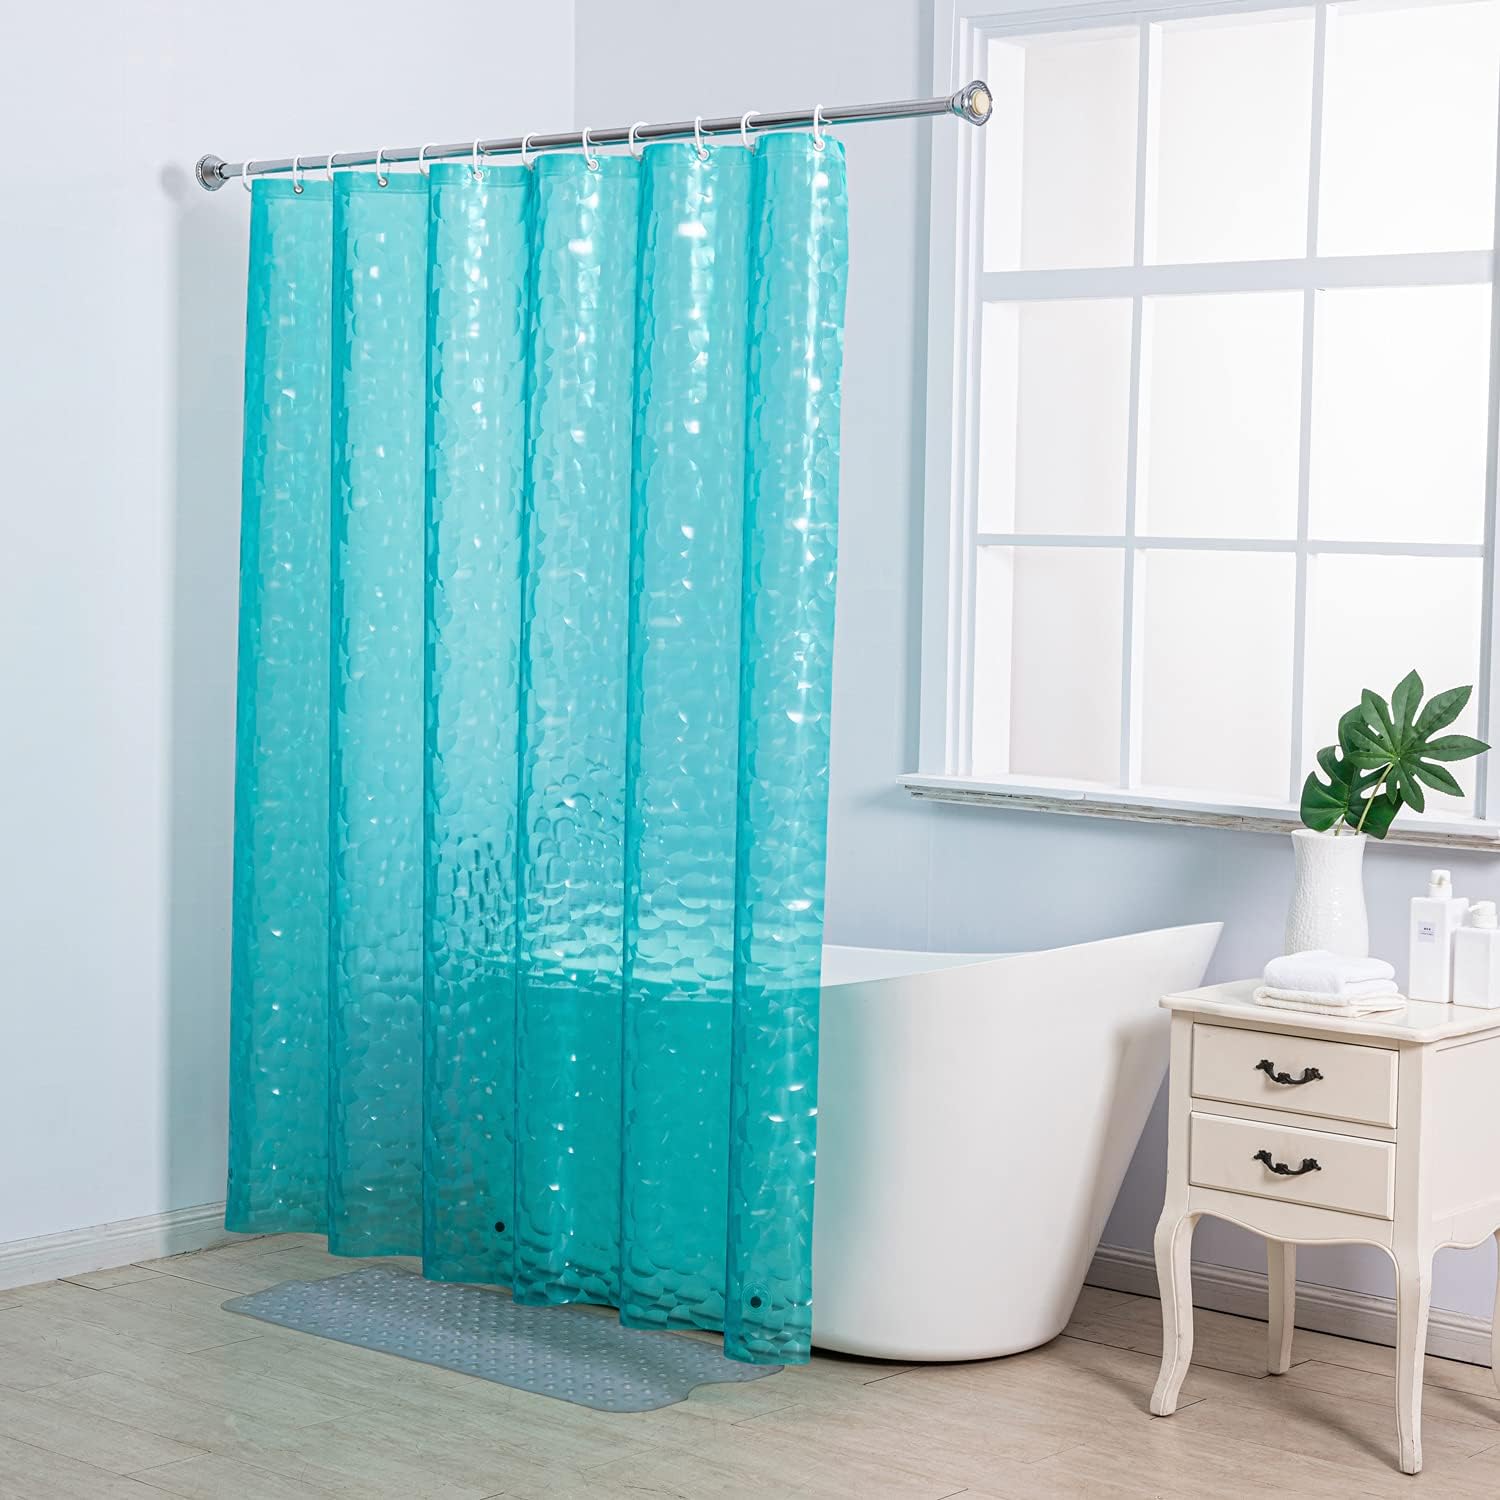 Waterproof Bath Curtain EVA Shower Liner Water Cube Effect Clear Ryhpez 3D Shower Curtain with Stainless Hooks 72x72 Inches